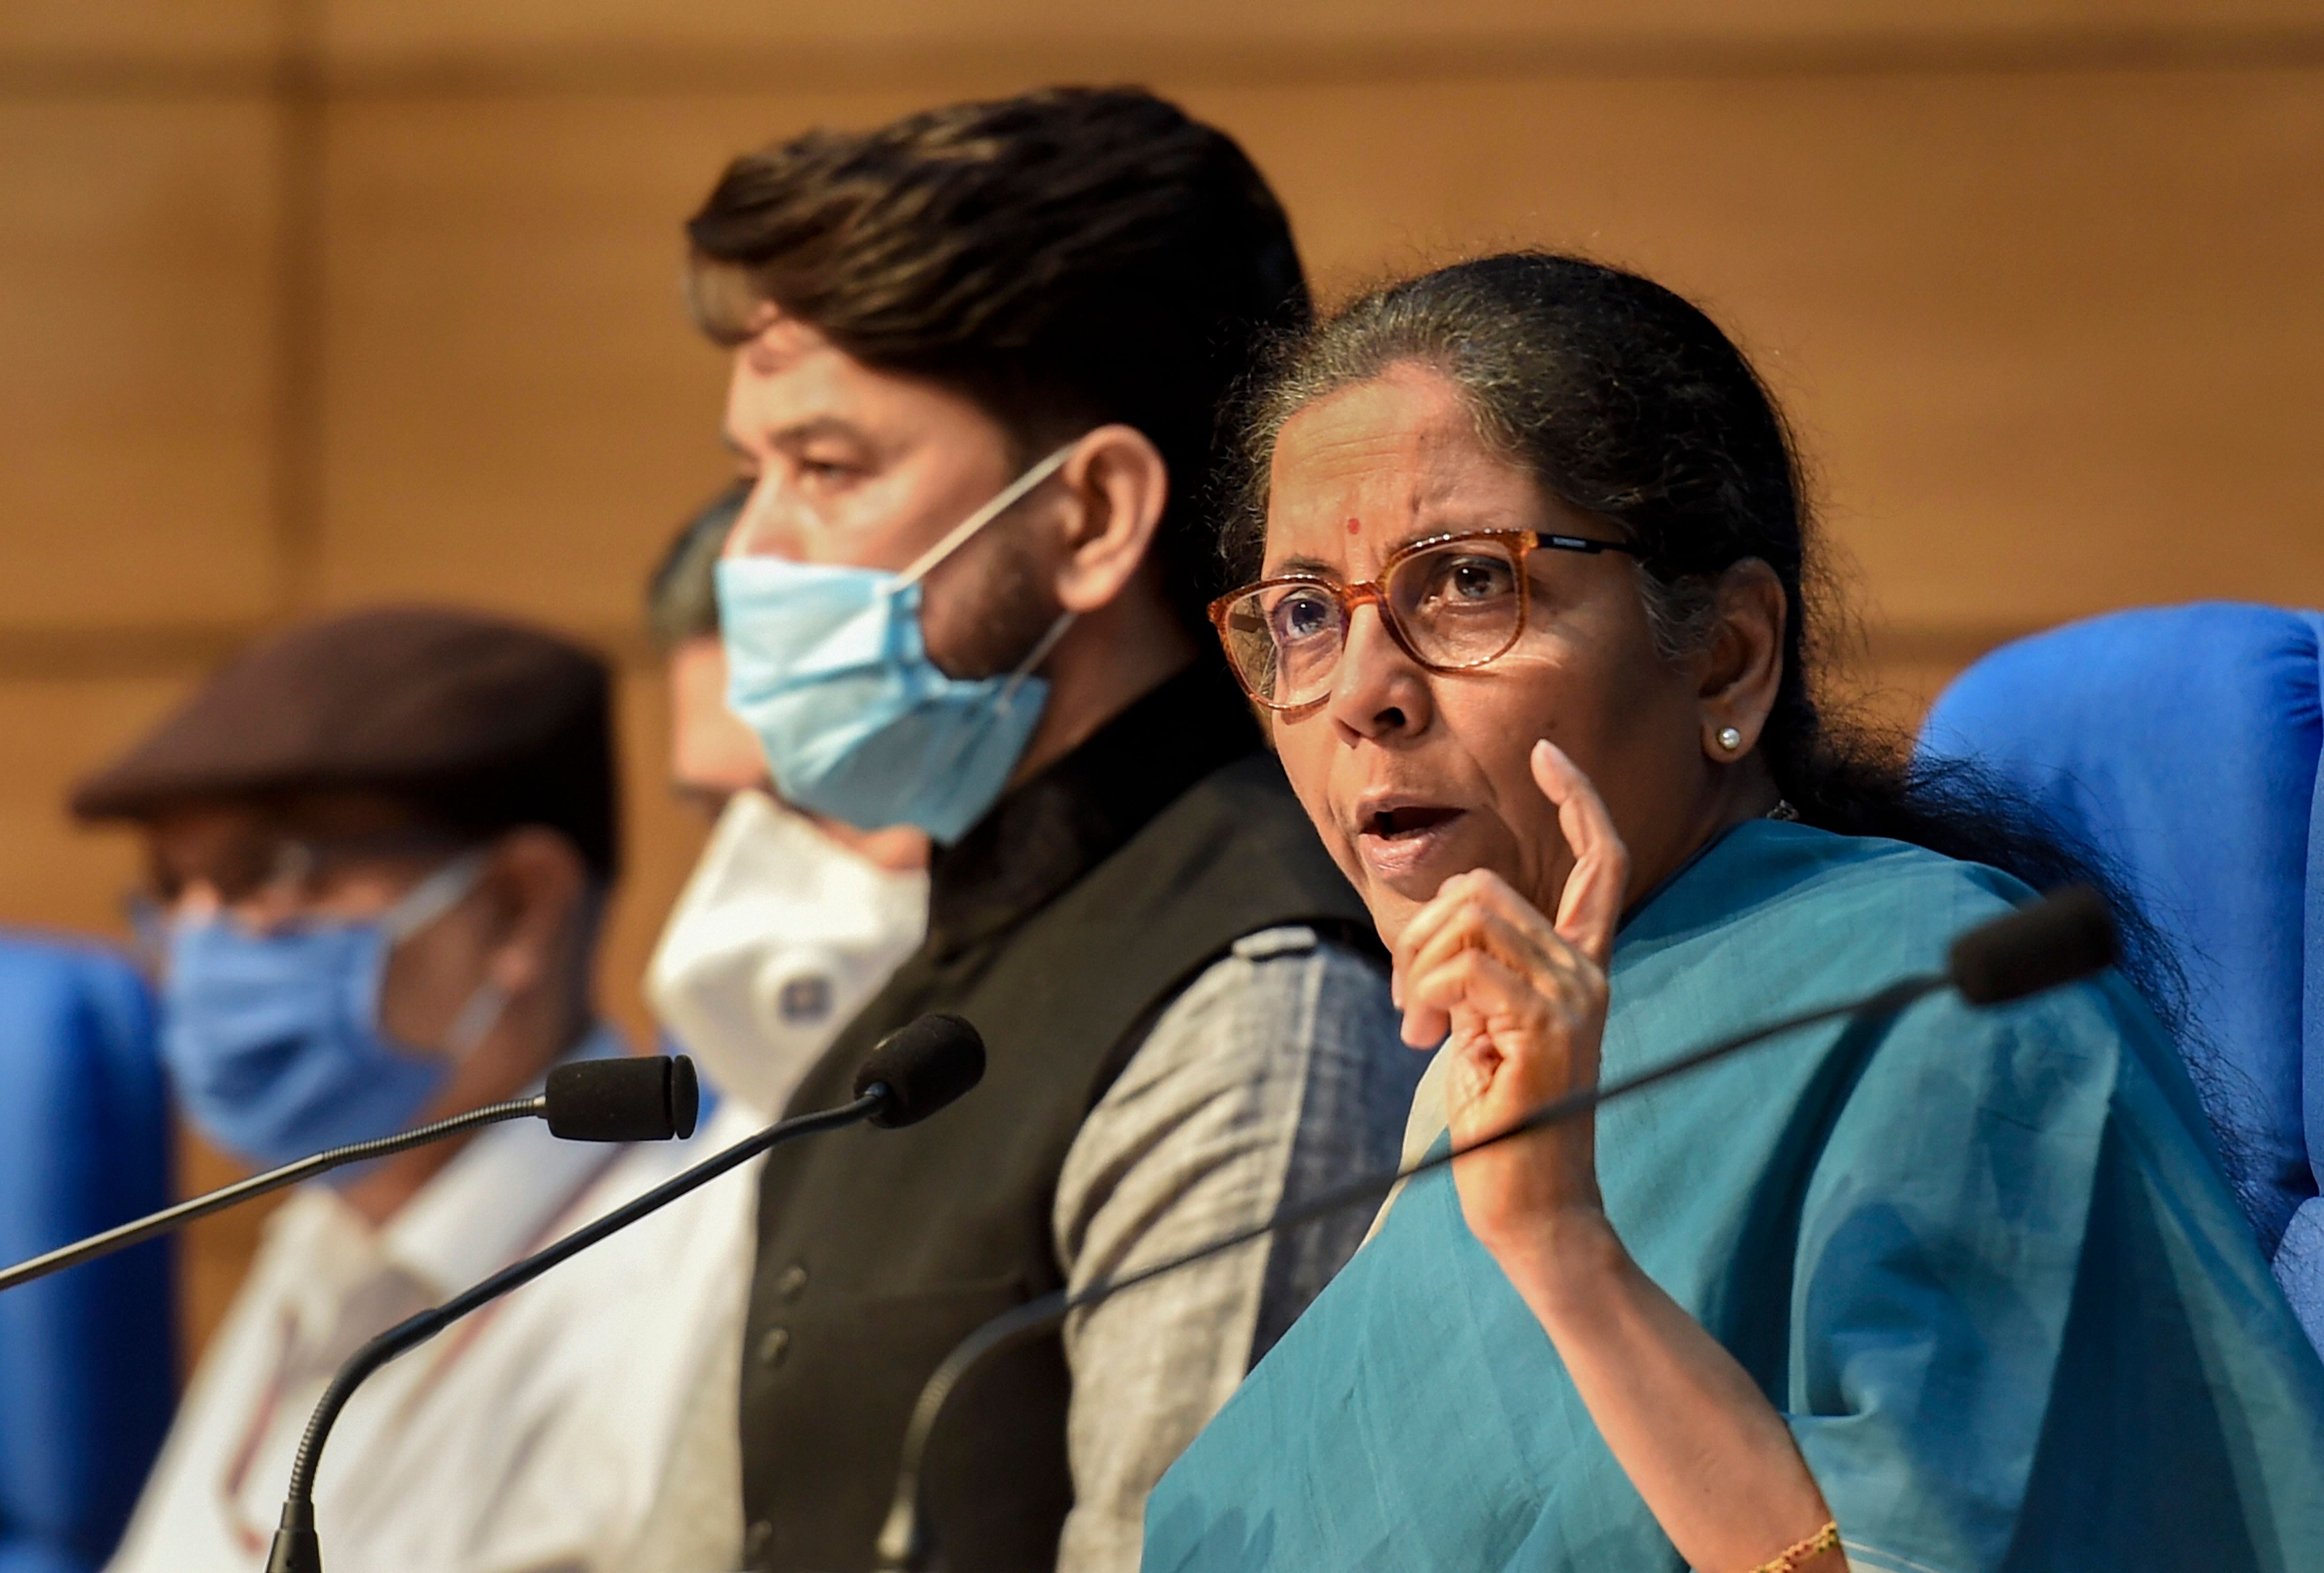 Finance Minister Nirmala Sitharaman announced the fifth and final tranche of economic stimulus package to deal with the economic fallout of the COVID-19 pandemic. The booster measures announced on Sunday related to MGNREGS, healthcare and education, businesses, de-criminalisation of the Companies Act, ease of doing business, public sector enterprises, and resources related to state governments. (PTI)